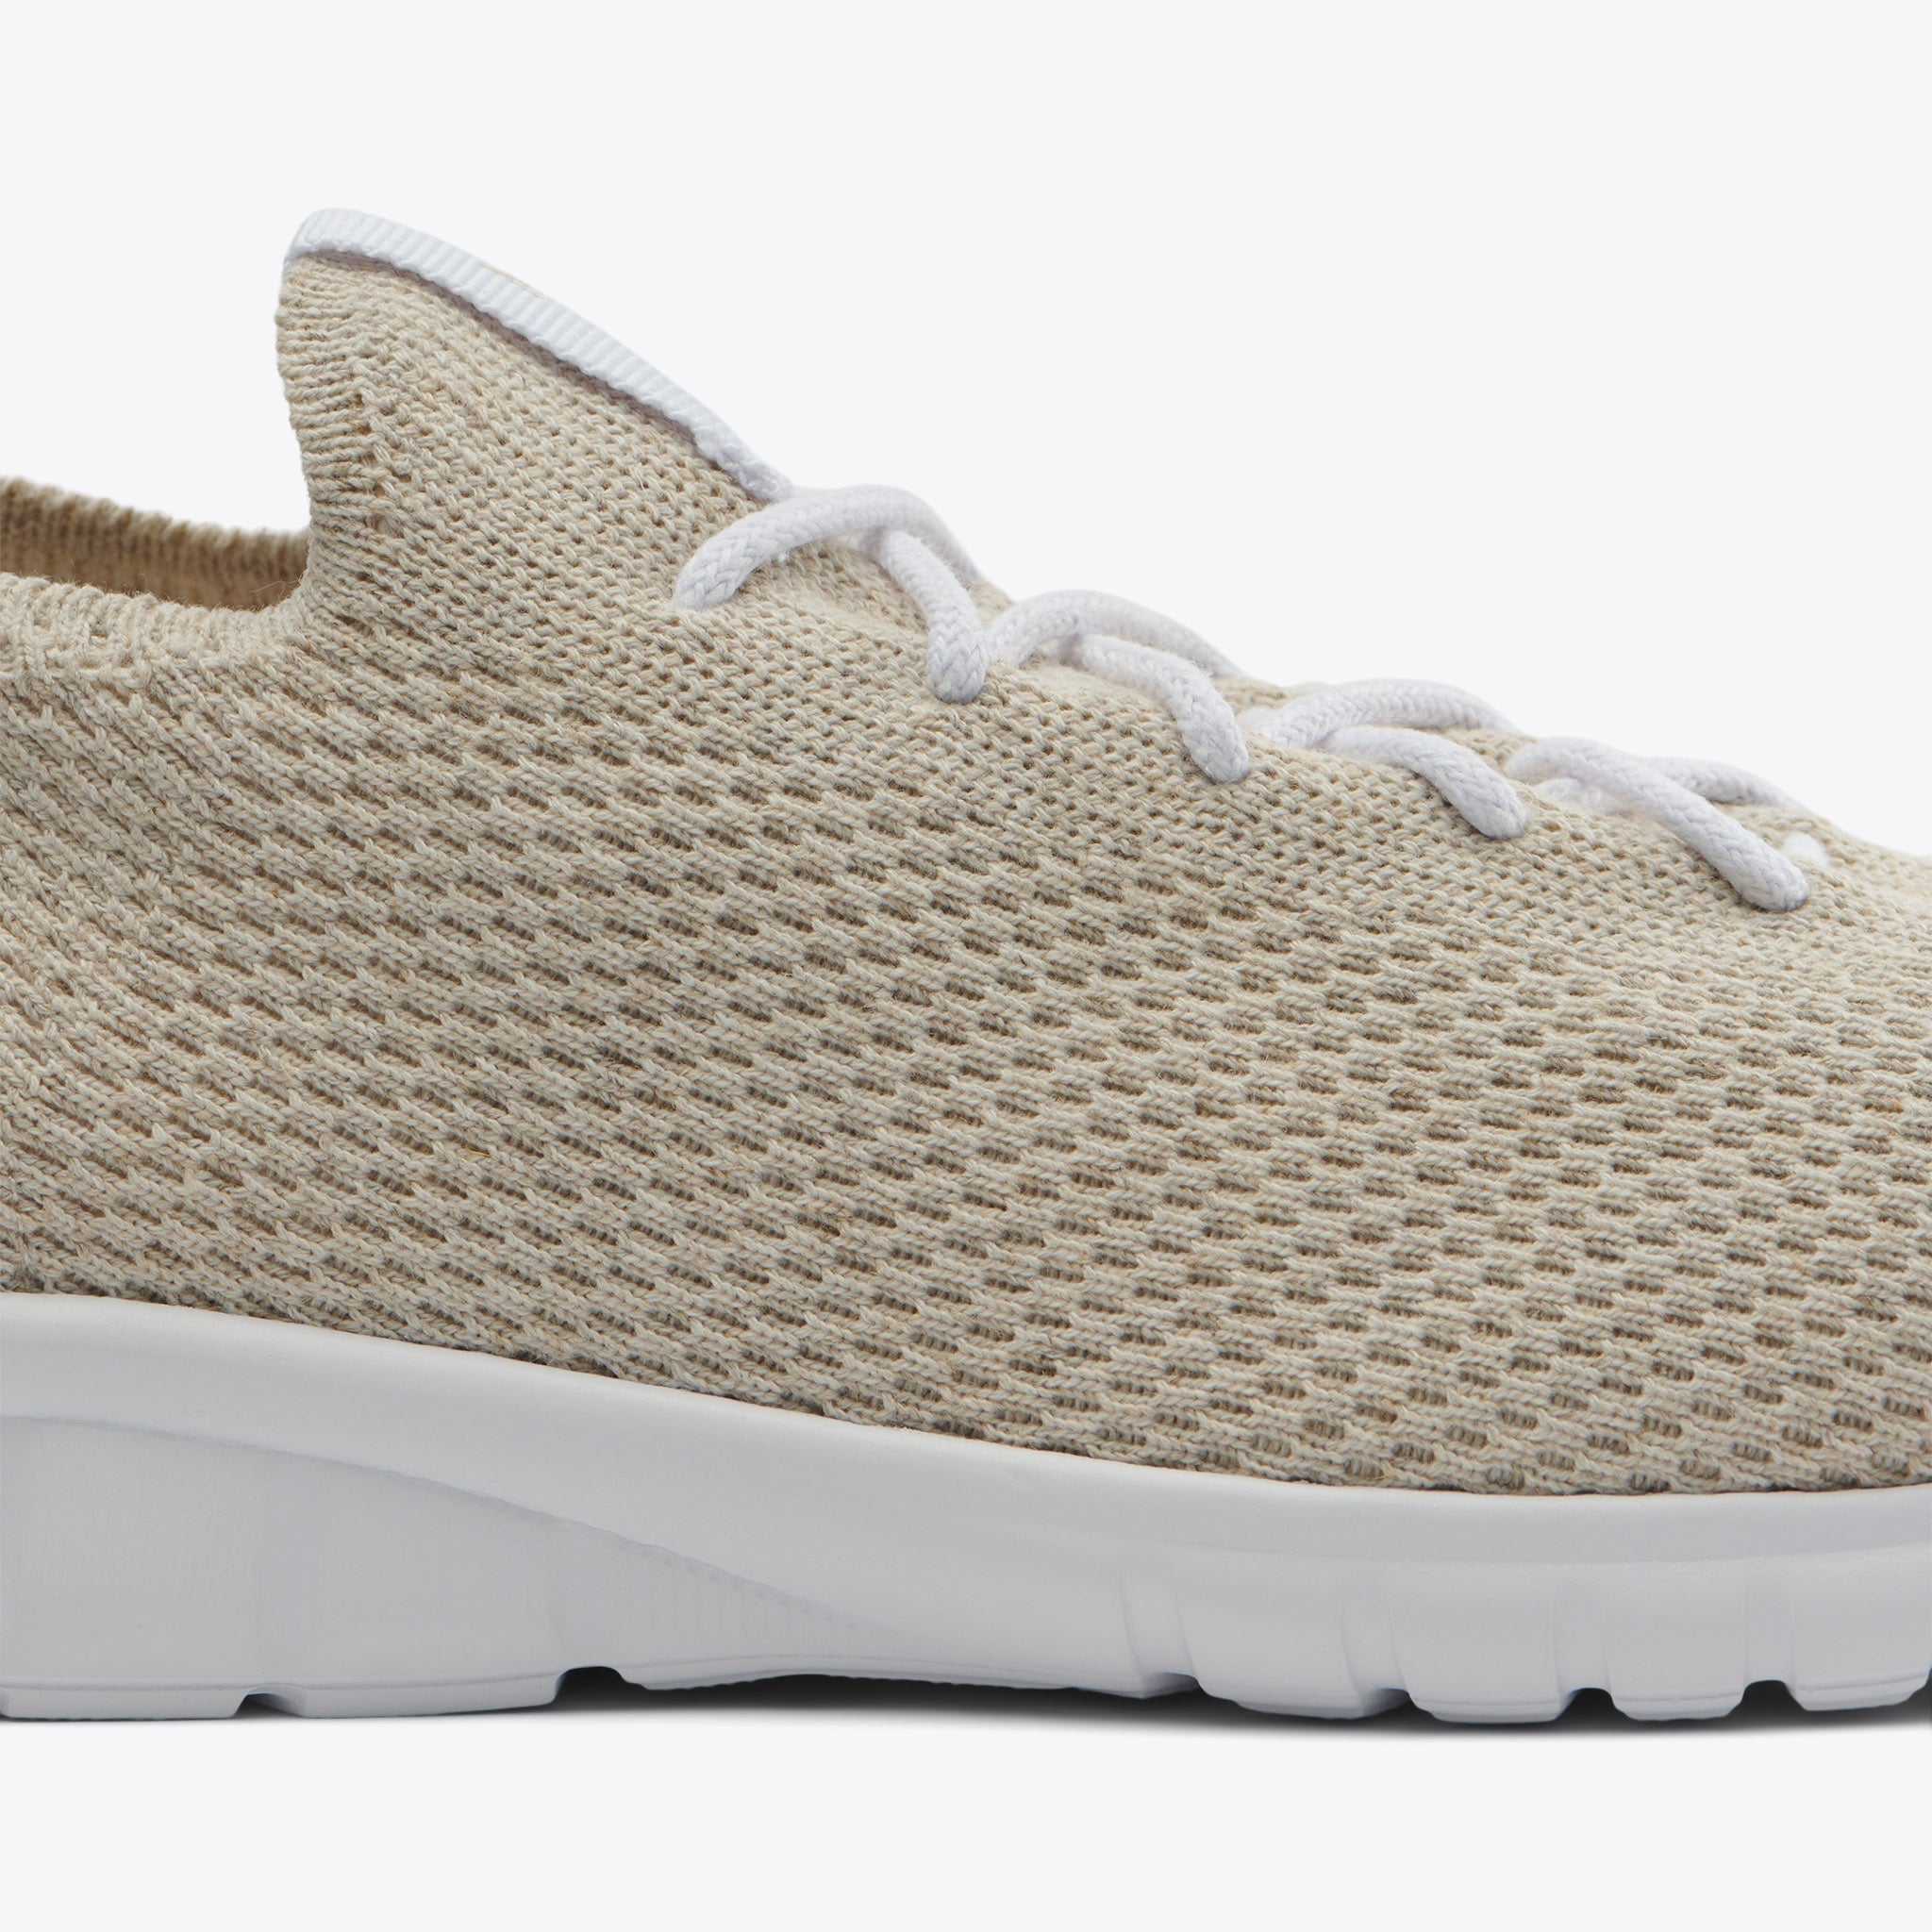 Product Image 6 of the Men's Athleisure Sneaker Linen Nisolo 